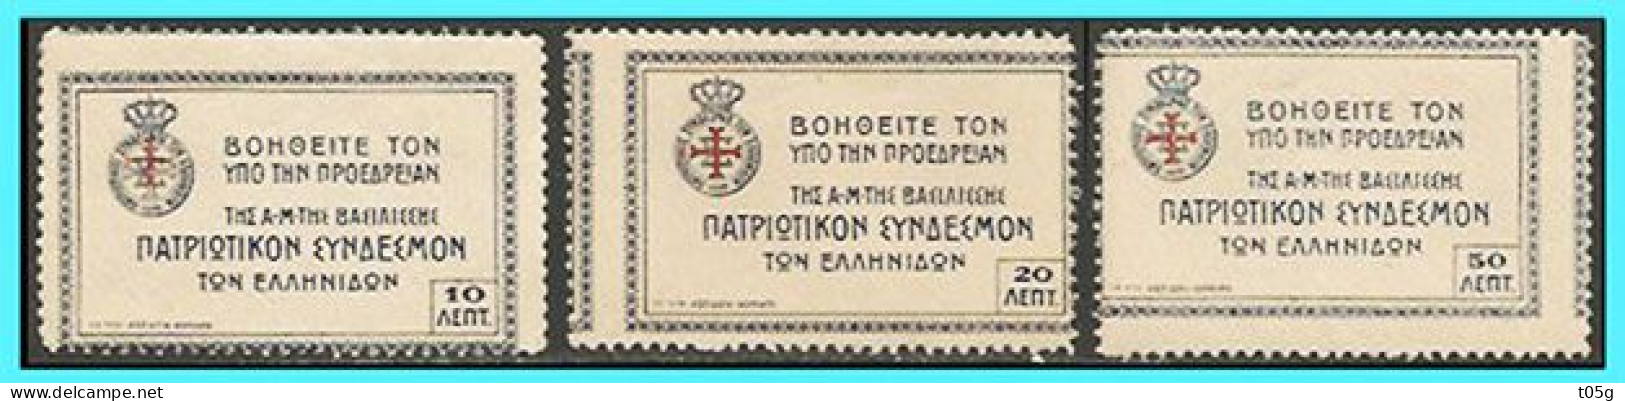 GREECE- GRECE- HELLAS  1915:Error Perforation   " Greek Wommen"s Patriotic League" Charity Stamps Compl. Set MNH**  "RR" - Beneficenza